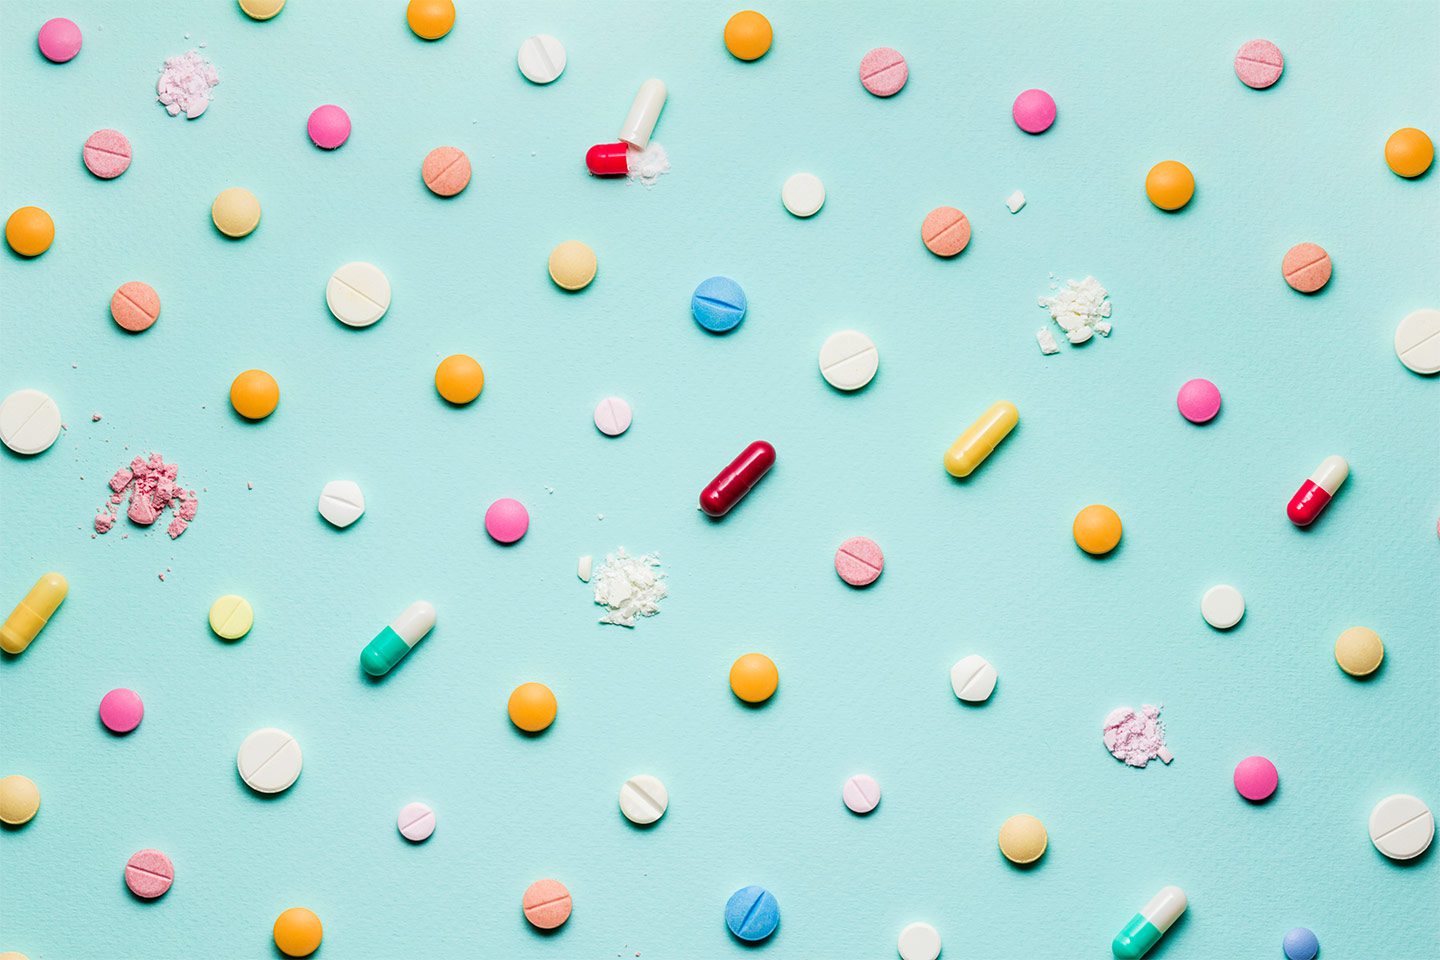 assorted colorful crushed pills and vitamins on a light blue background